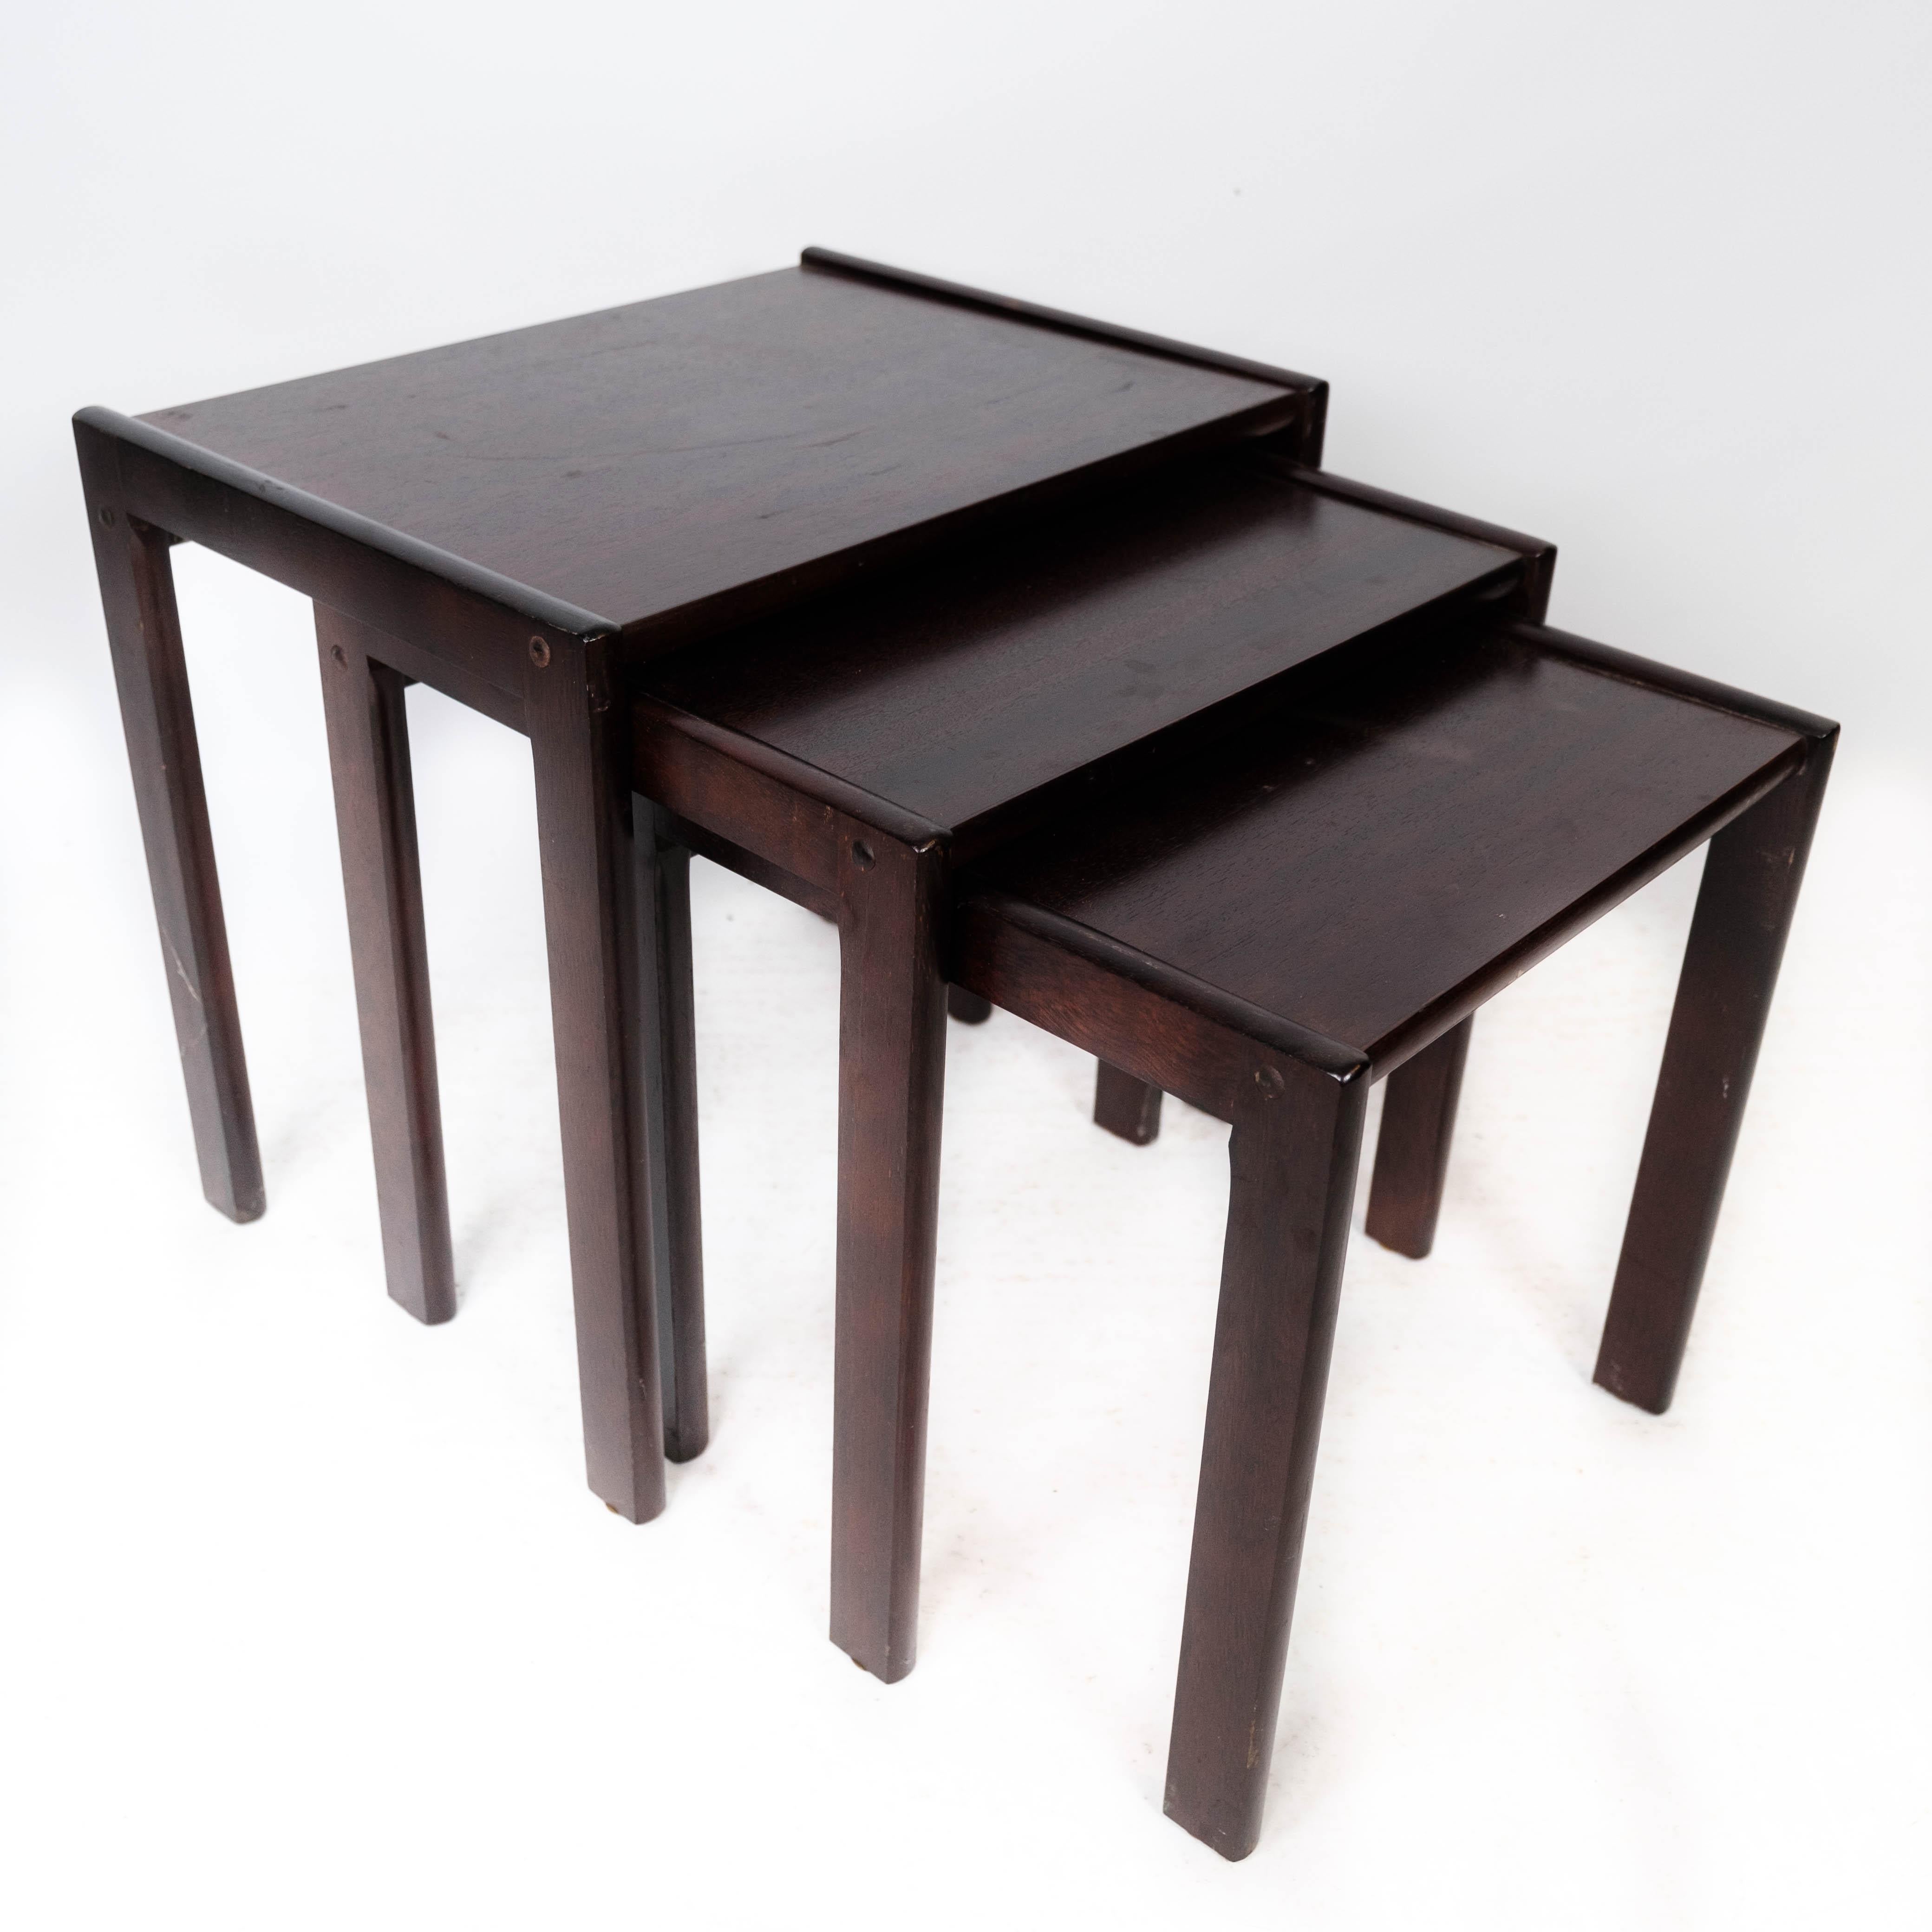 Set of Nesting Tables in Dark Wood of Danish Design from the 1960s For Sale 1